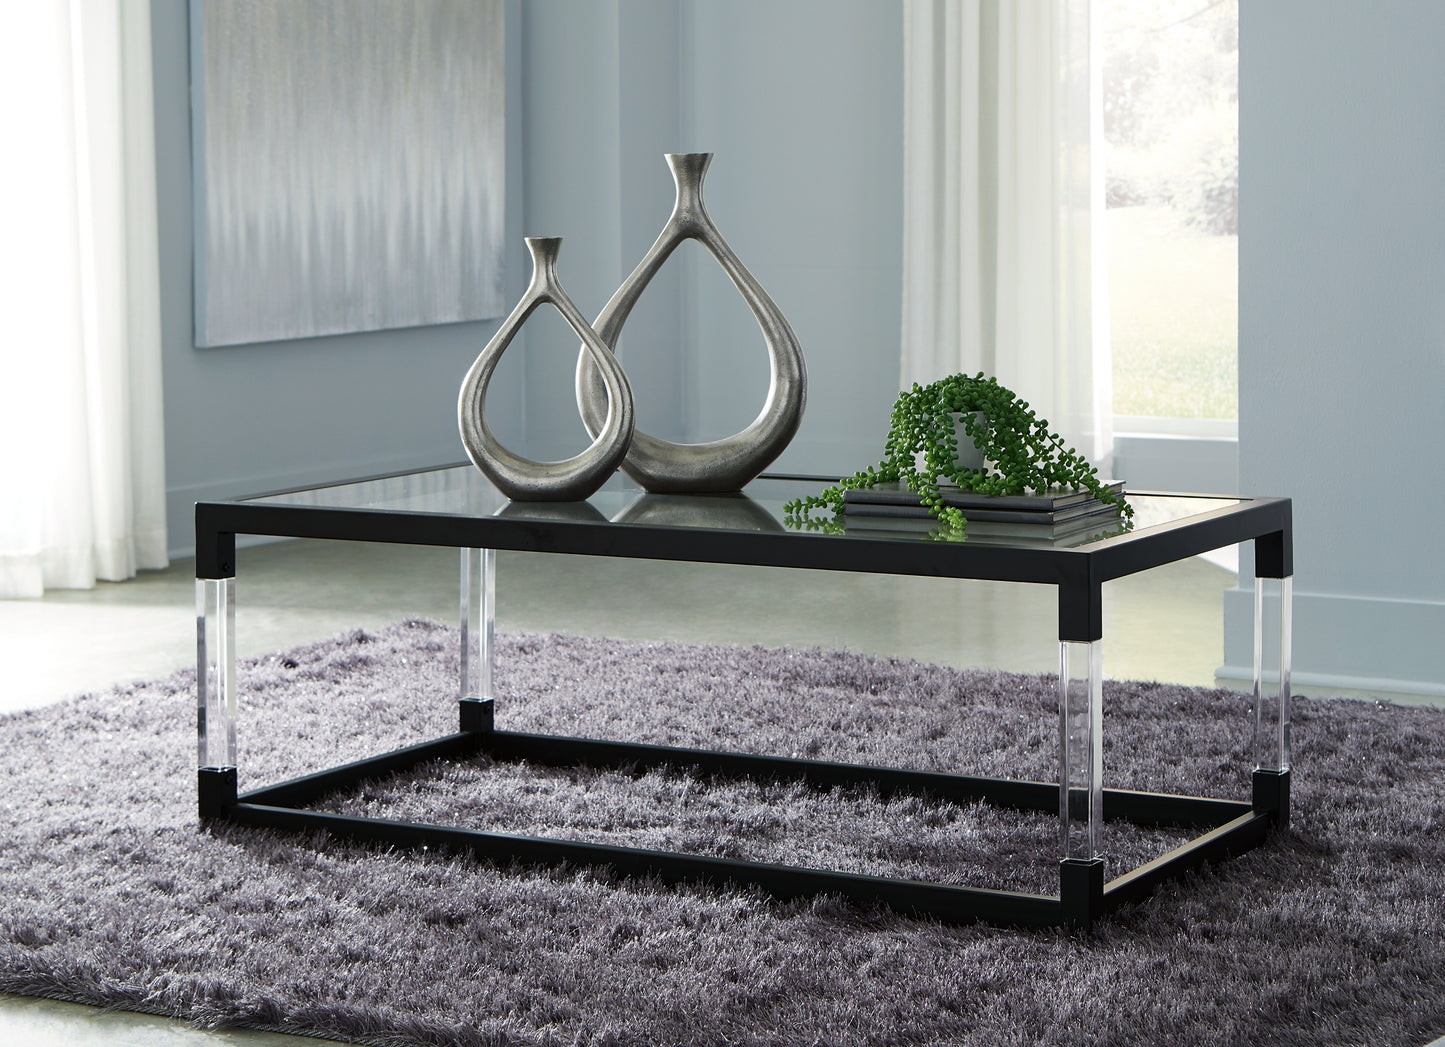 Nallynx Coffee Table with 2 End Tables Wilson Furniture (OH)  in Bridgeport, Ohio. Serving Bridgeport, Yorkville, Bellaire, & Avondale